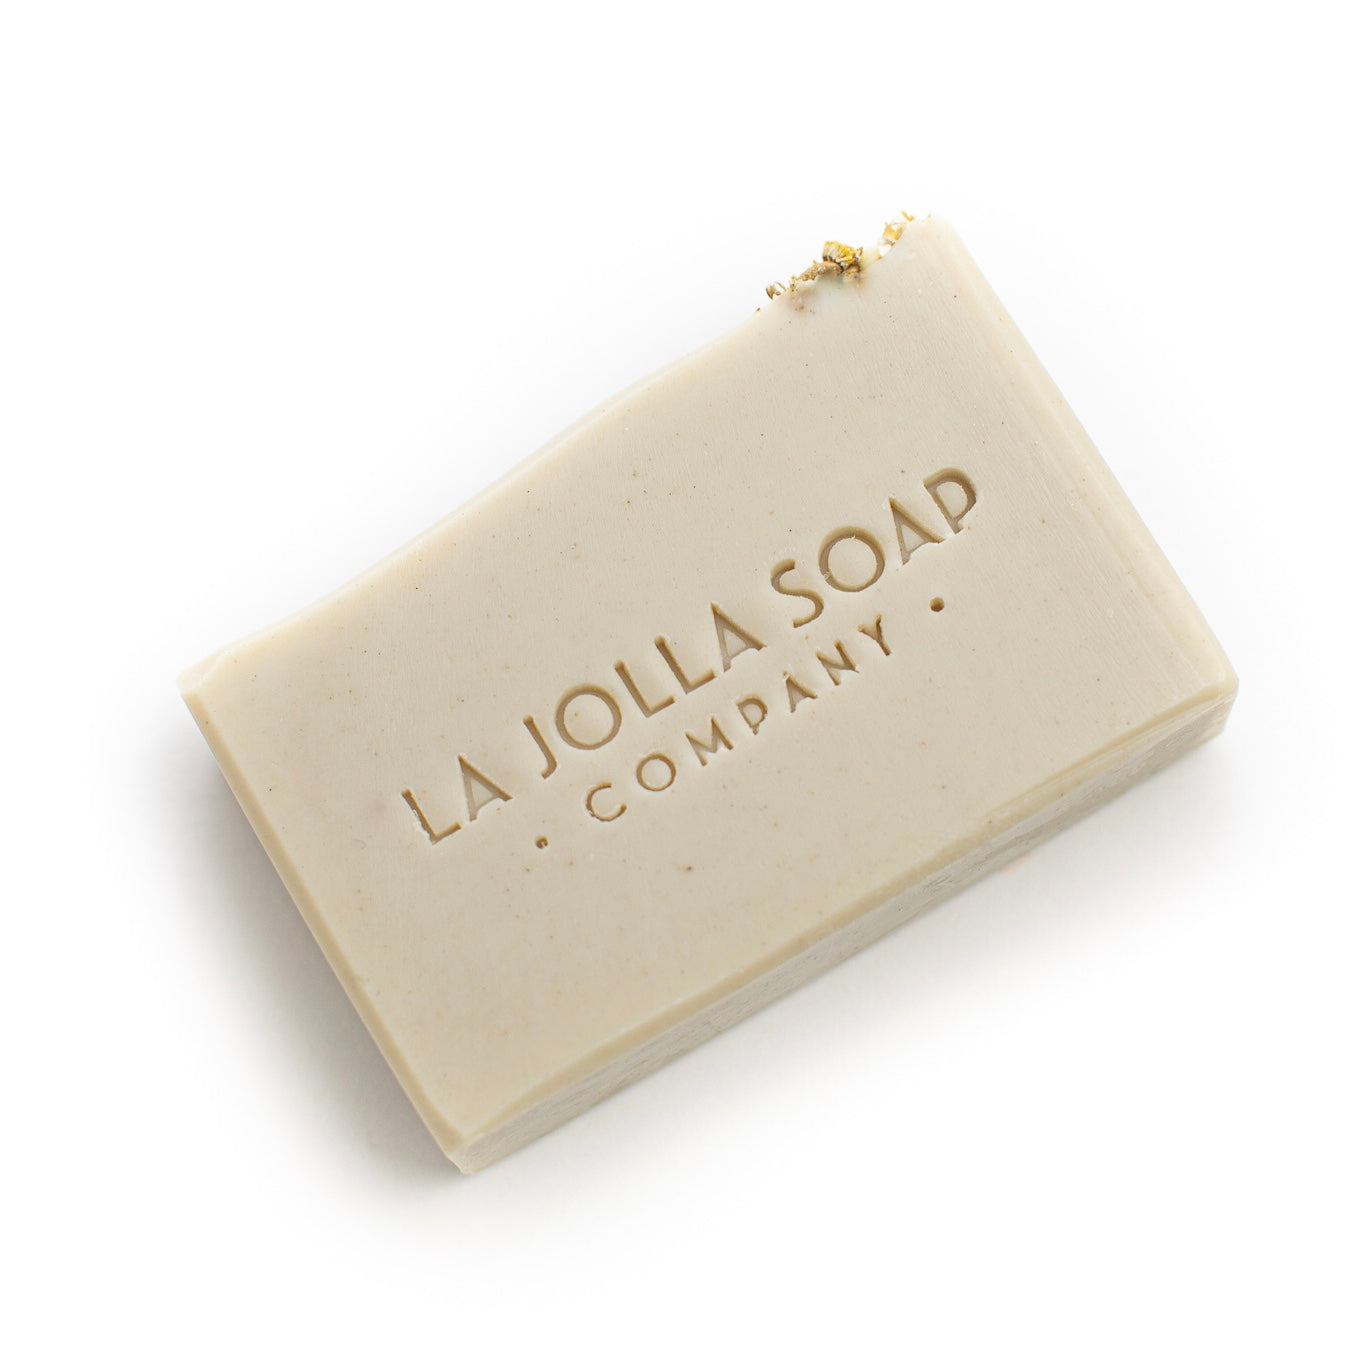 La Jolla Soap Company - This handcrafted blend is gentle and mild. Moisture rich olive oil and shea butter are enriched with oats and chamomile, soothing and calming, high in antioxidants and anti-inflammatory properties. Suitable for sensitive skin.